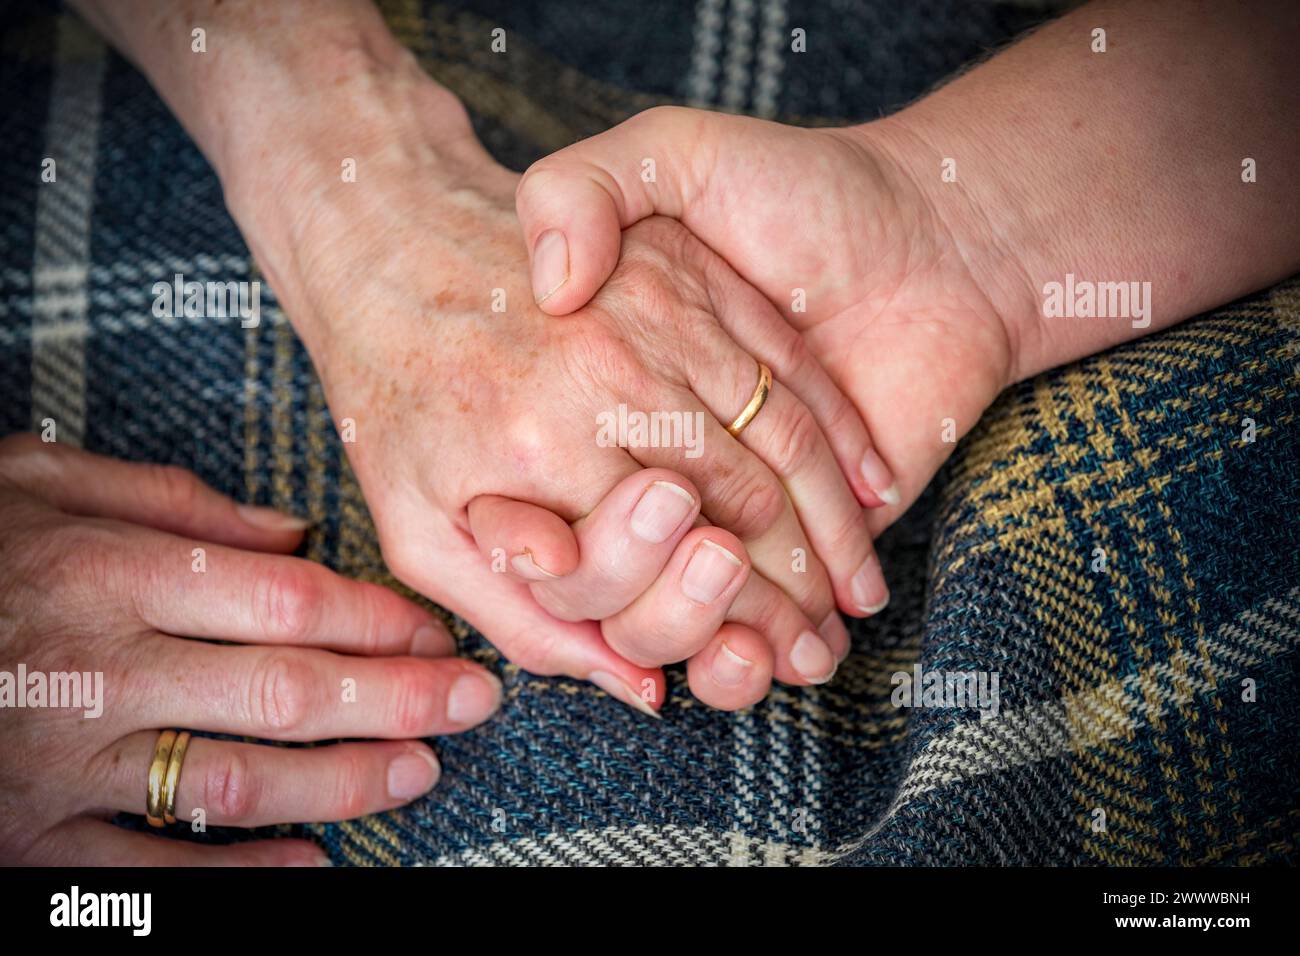 Two Holding Hands; Caring; UK Stock Photo